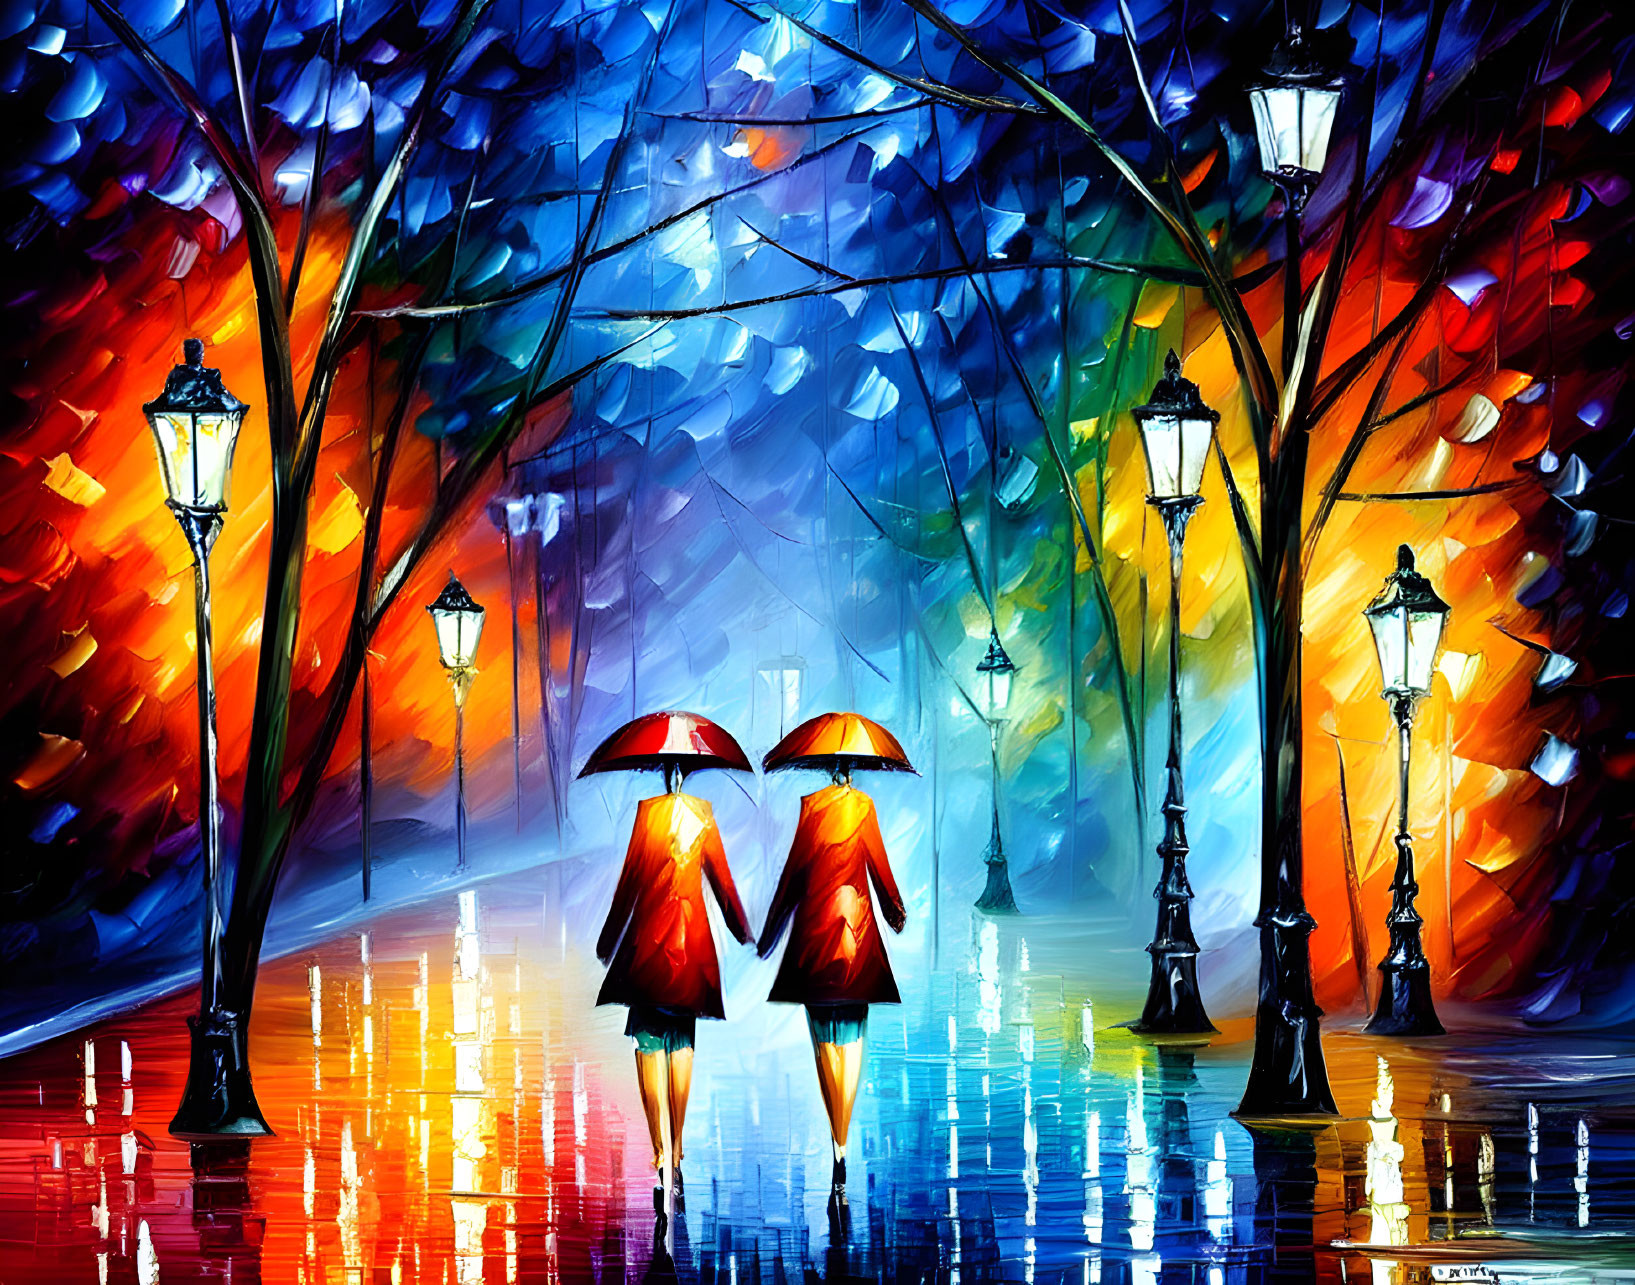 Abstract painting: Two people with umbrellas on rain-soaked street